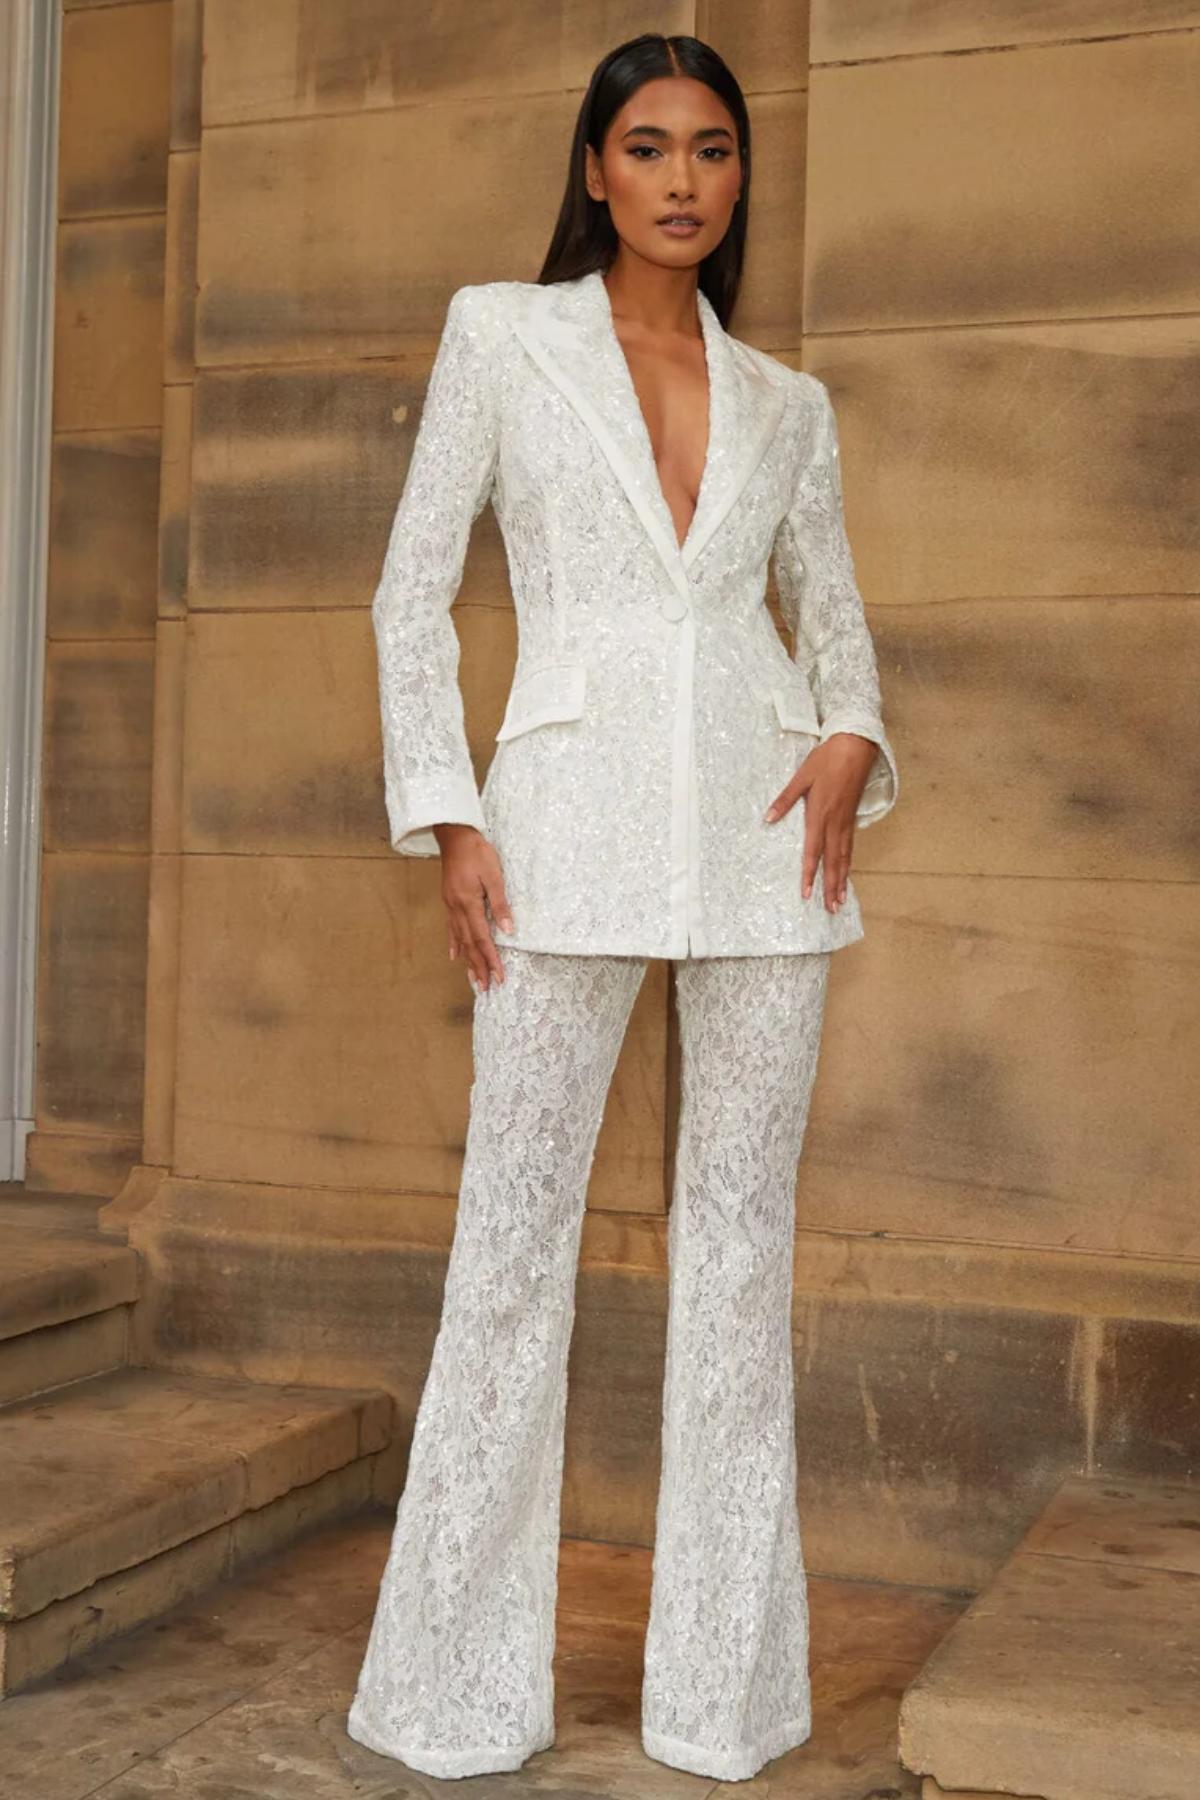 25 Best Wedding Suits for Women - Parade